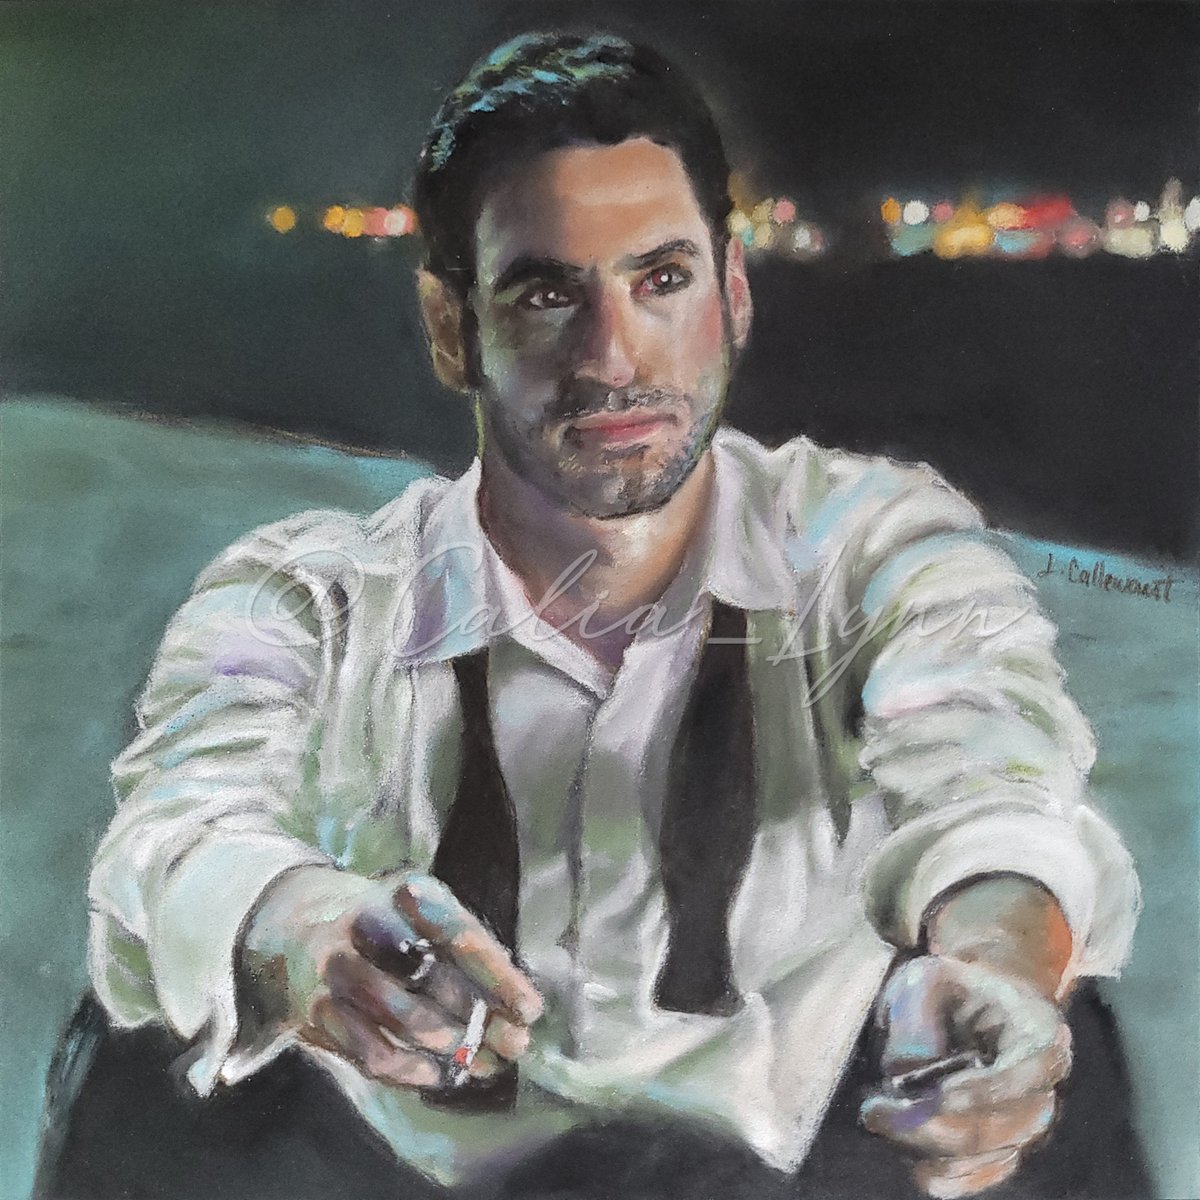 Cutting it close for this one, it's the last hours of September...   For the ADC #Tuxedo prompt.  S1E7,  #Lucifer sitting on the beach. 9'x9' #ChalkPastels  #TomEllis #LuciferMorningstar #Luciferfanart #Lucifanart #Luciferfanartprompts @ArtDemonsCo #Lucifanartprompts #Lucifans